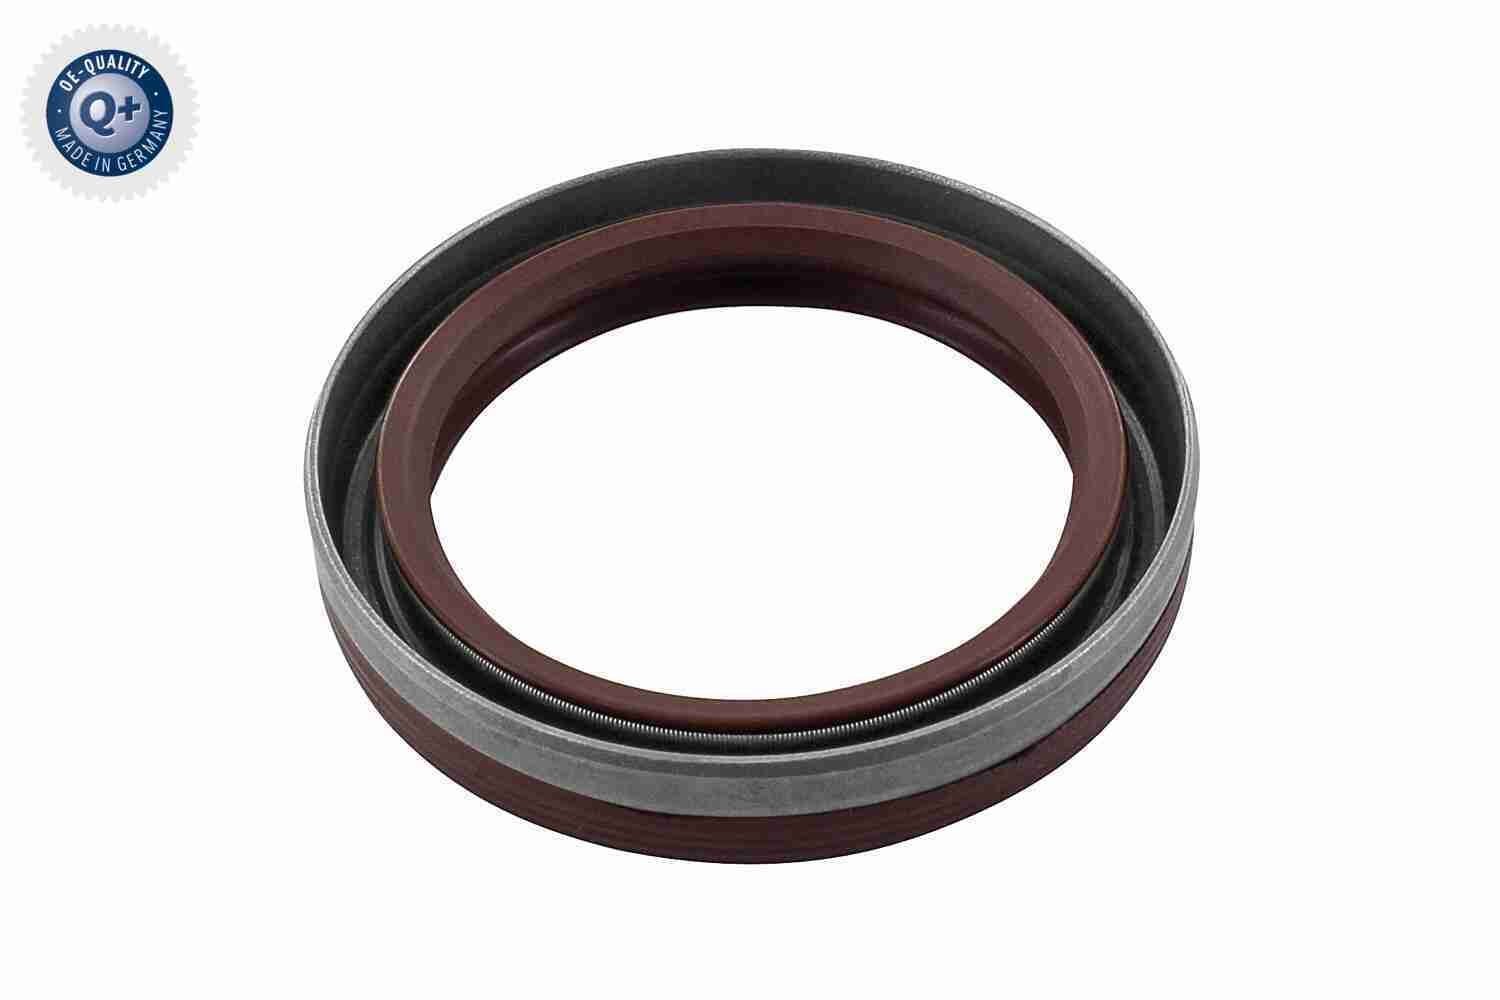 V40-1806 VAICO Crankshaft oil seal OPEL Q+, original equipment manufacturer quality MADE IN GERMANY, frontal sided